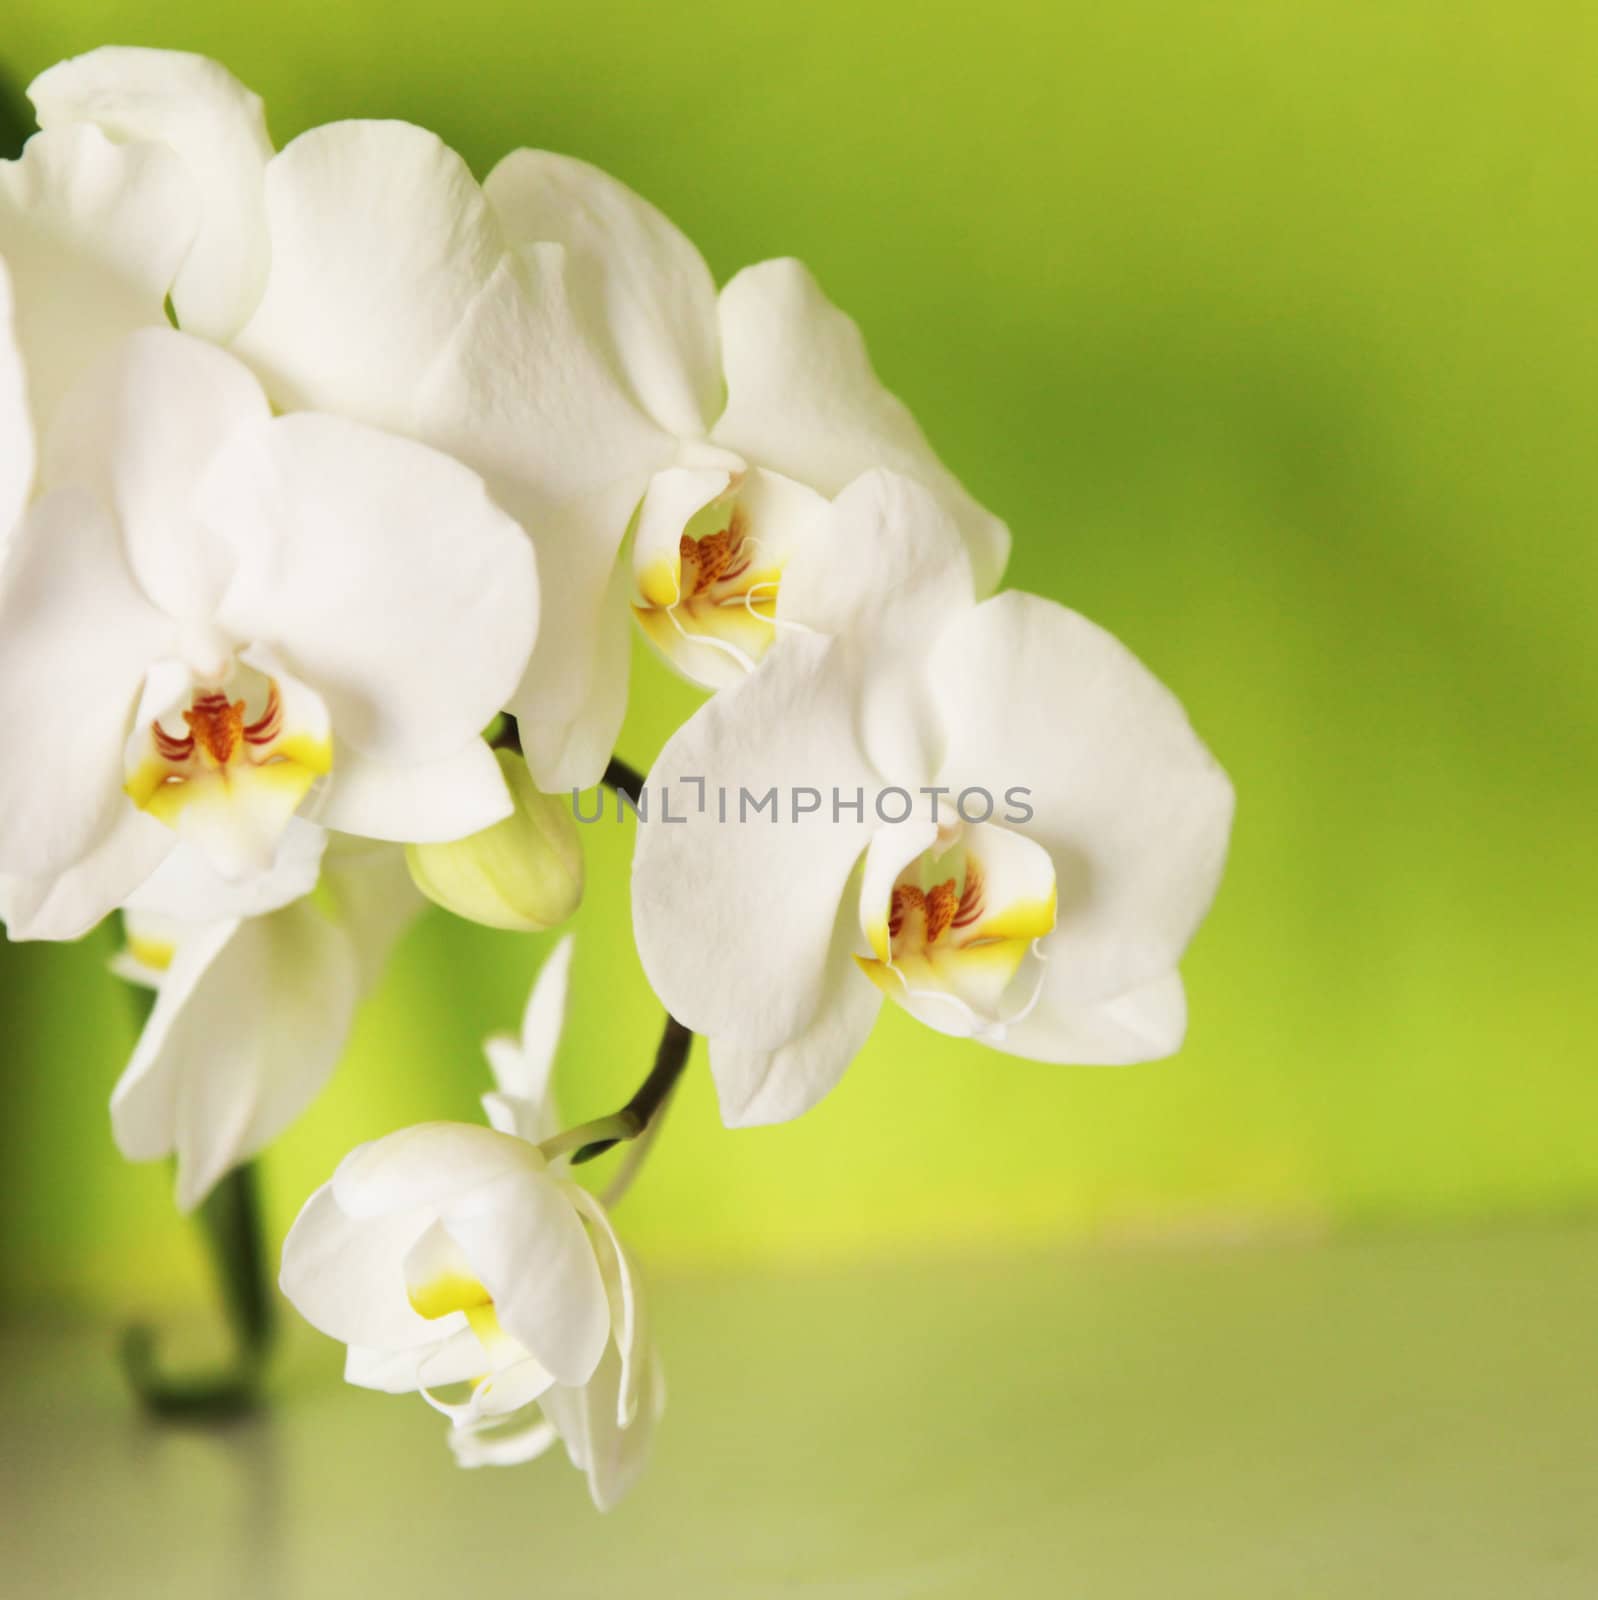 Orchid on a green background - square